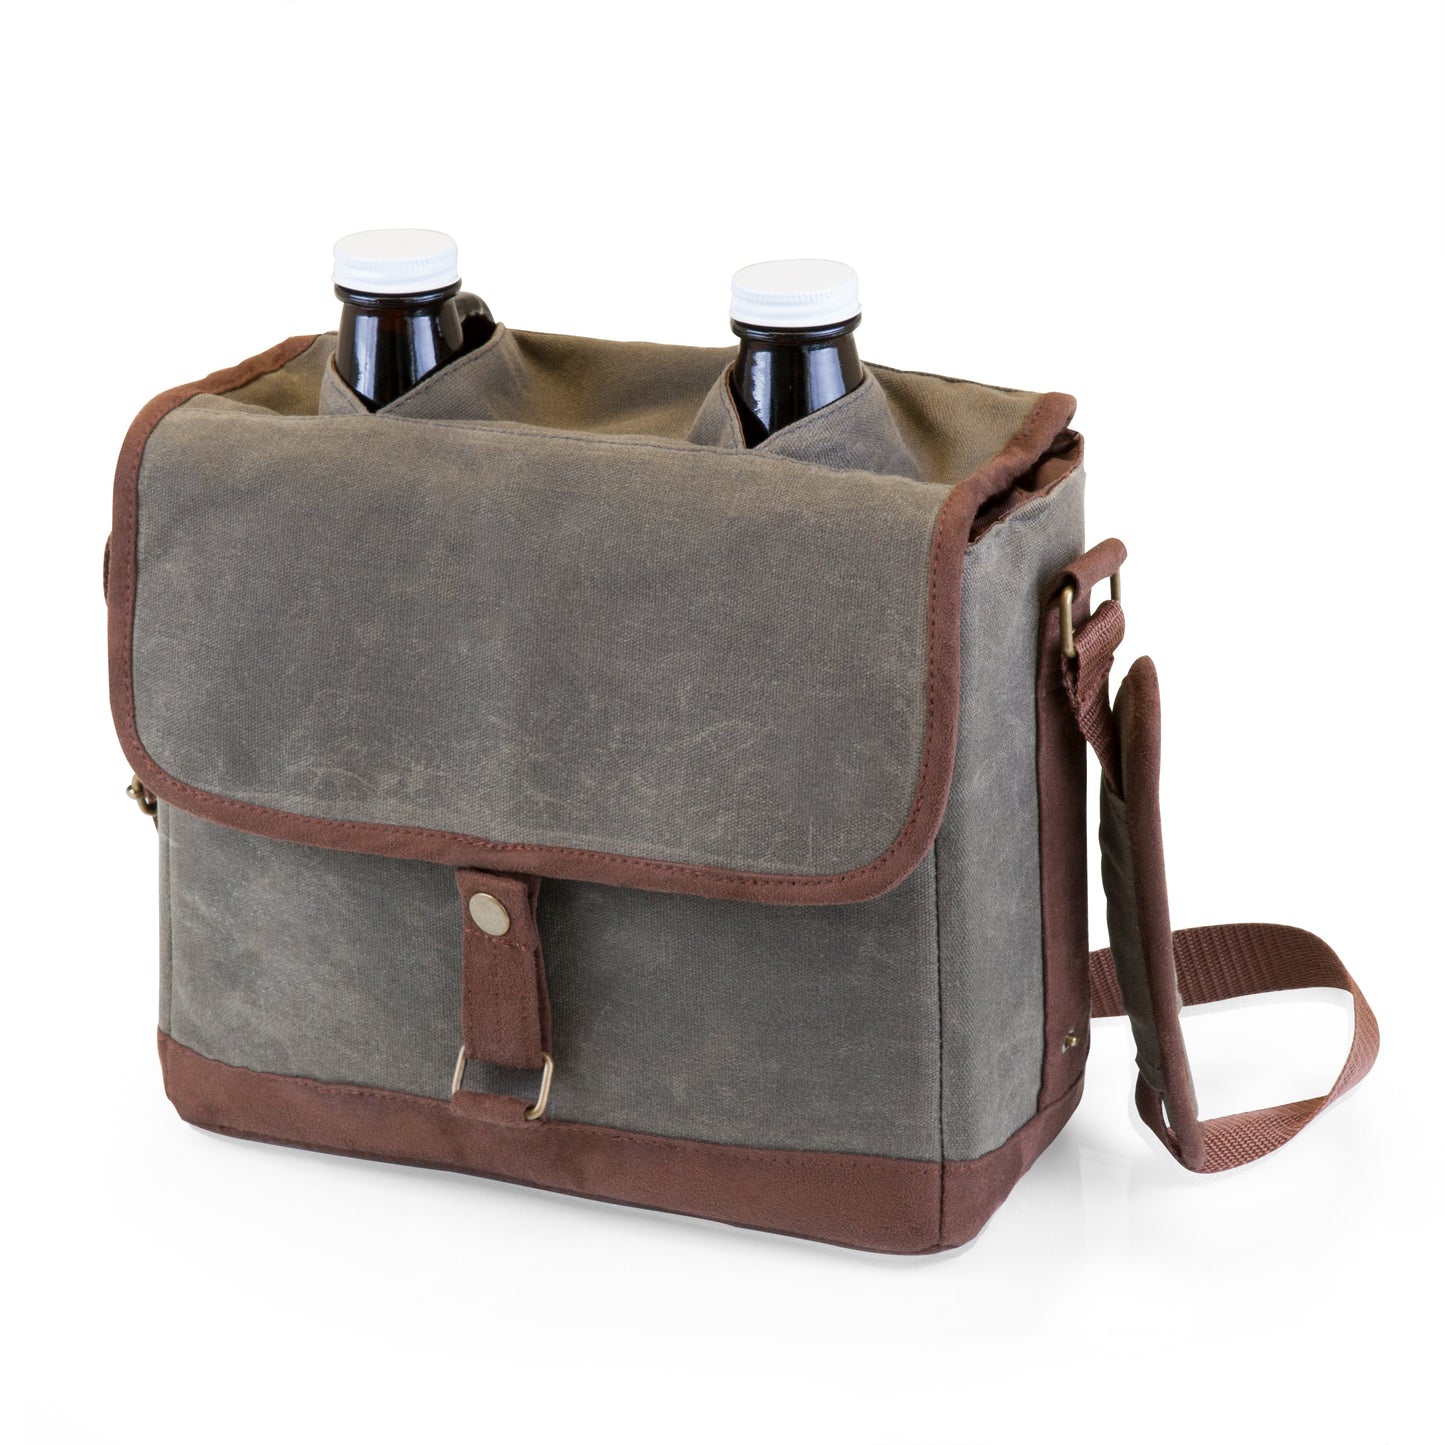 Insulated Double Growler Tote with 64 oz. Glass Growlers